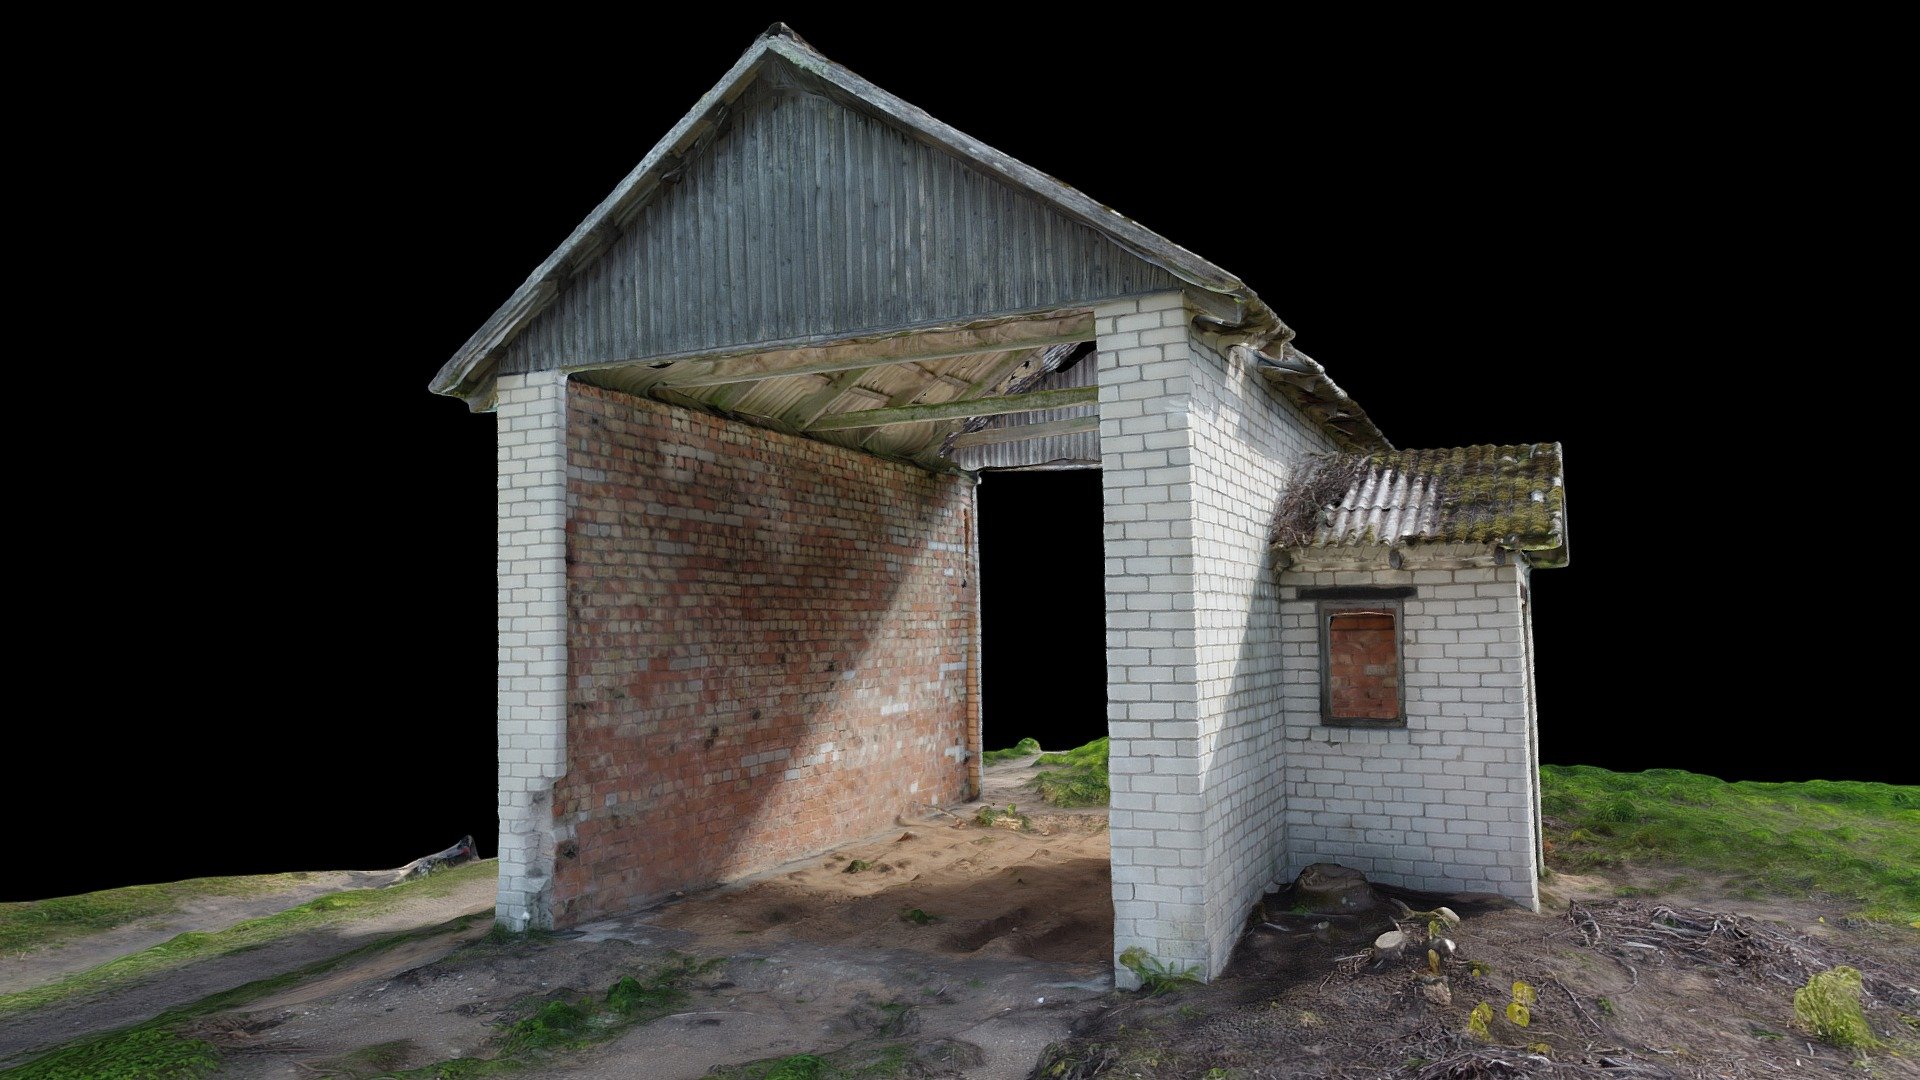 Old, abandoned farm house in a field. 
Brick walls, tiled roof, planks 3d model